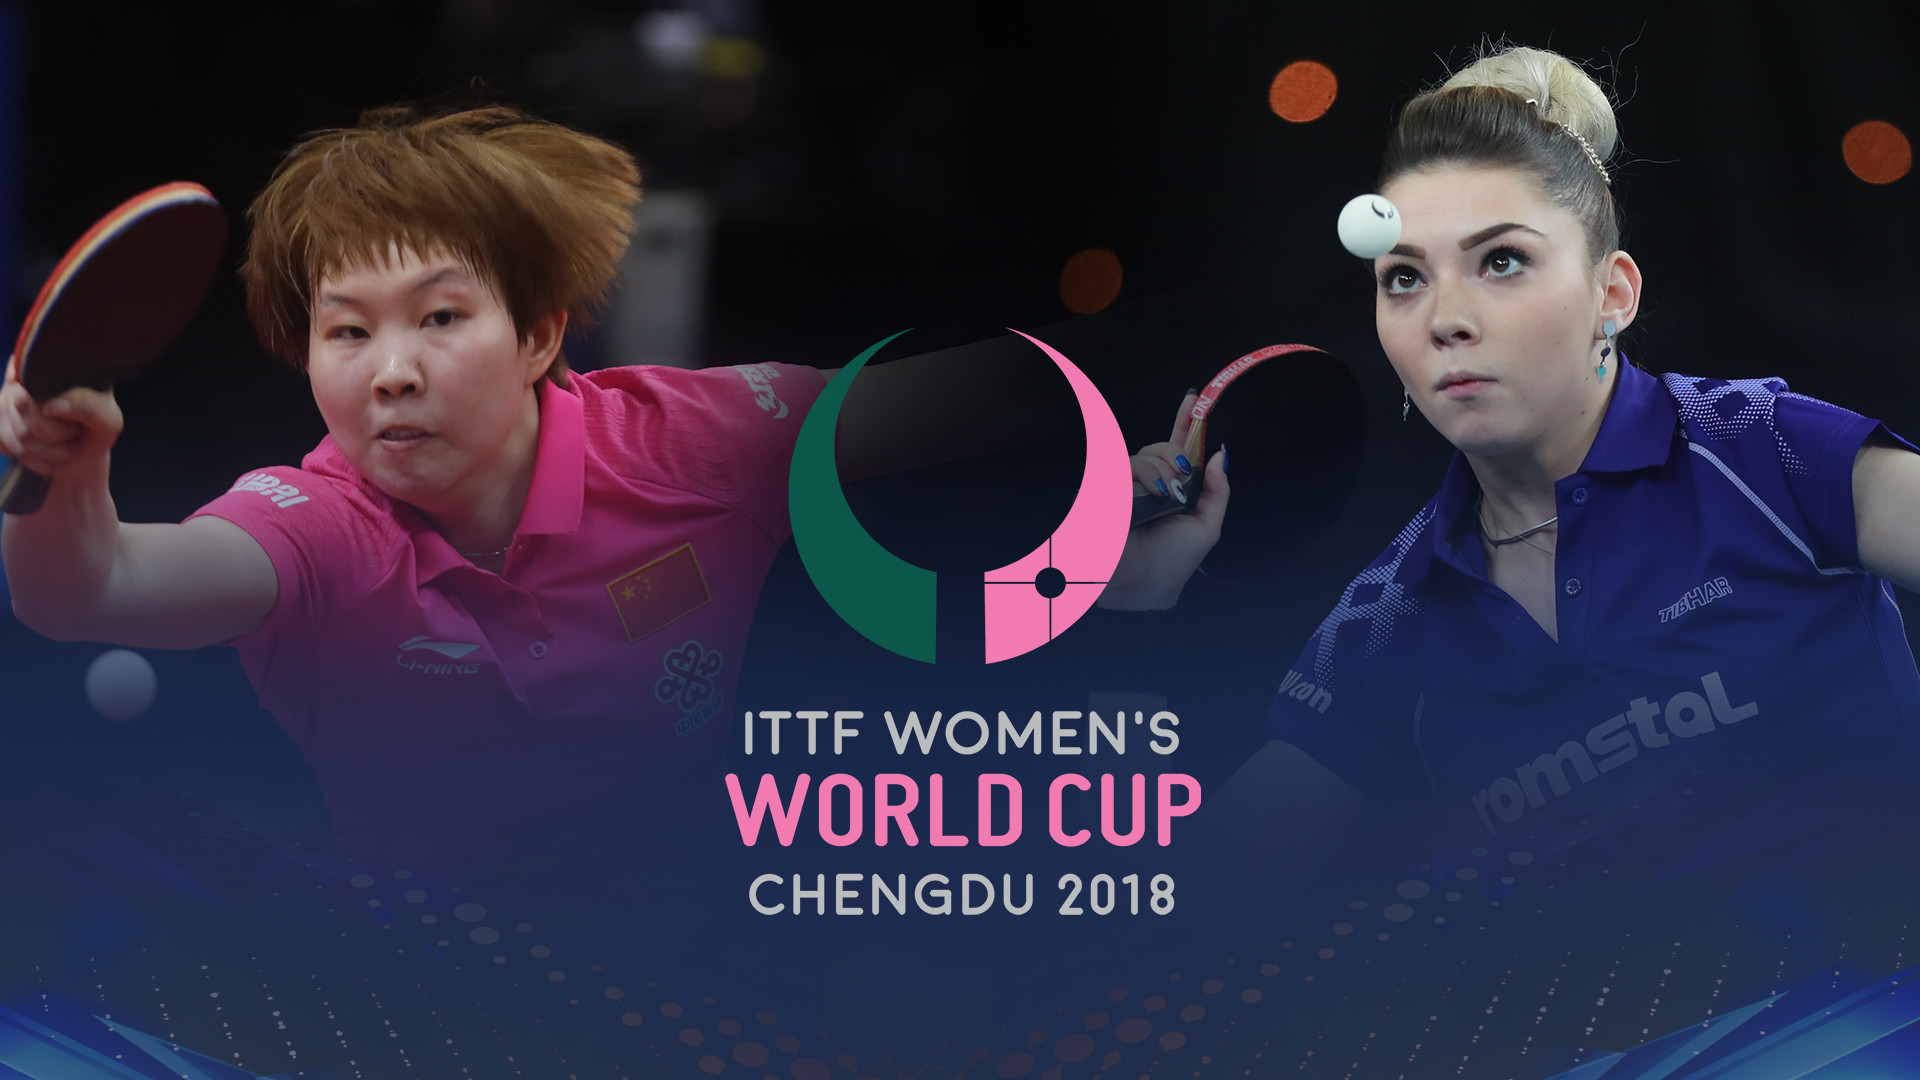 Zhu Yuling seeks to defend ITTF Women's World Cup title in home city of Chengdu